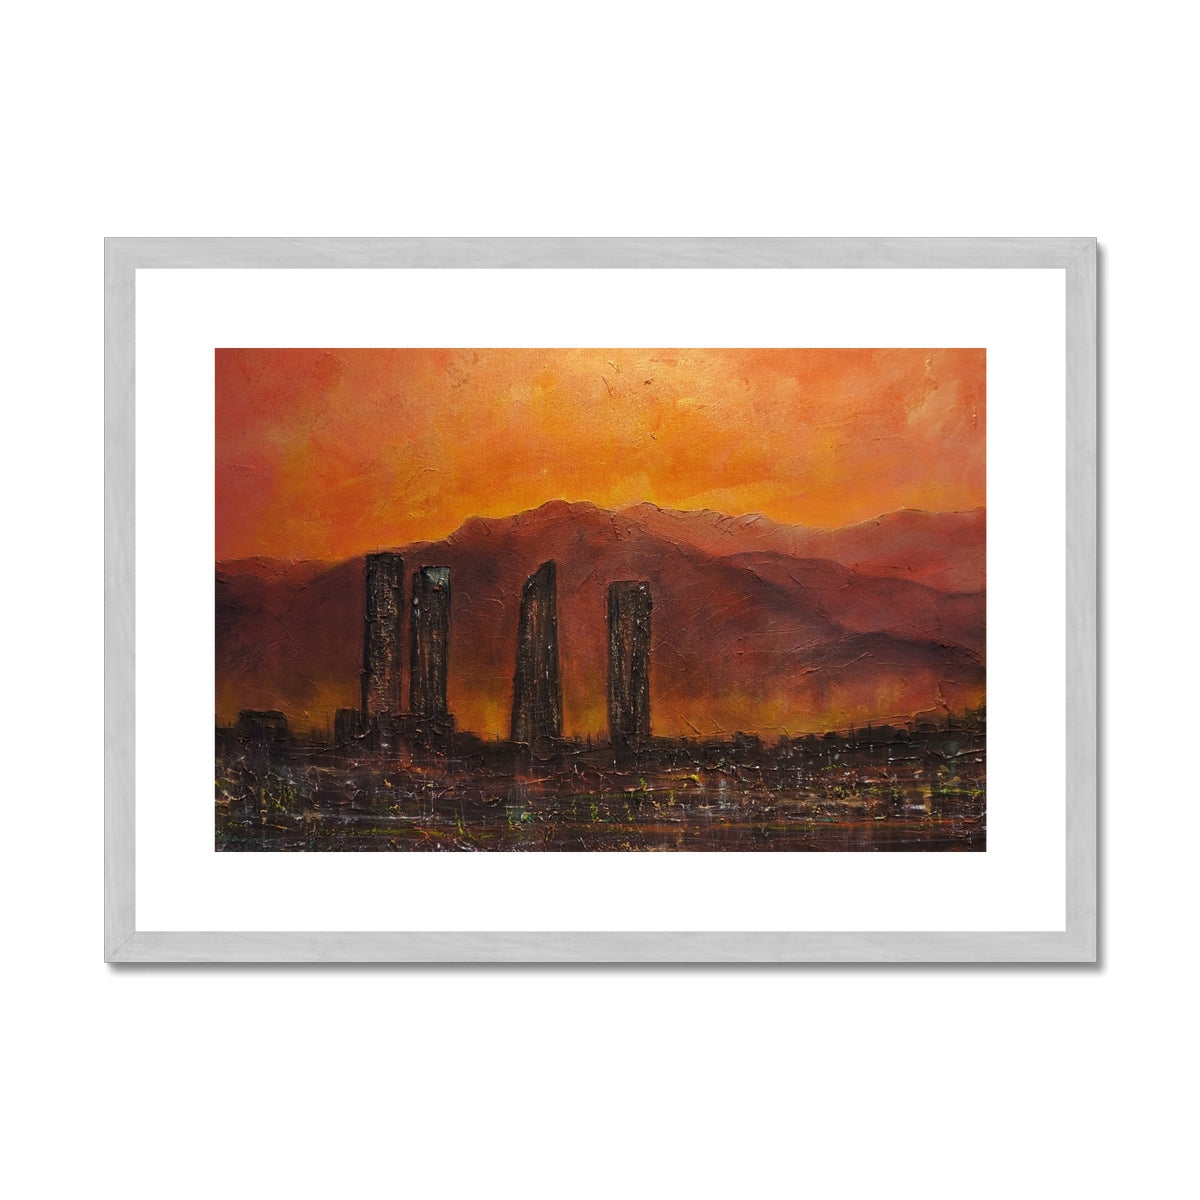 Madrid Dusk Painting | Antique Framed & Mounted Prints From Scotland-Antique Framed & Mounted Prints-World Art Gallery-A2 Landscape-Silver Frame-Paintings, Prints, Homeware, Art Gifts From Scotland By Scottish Artist Kevin Hunter